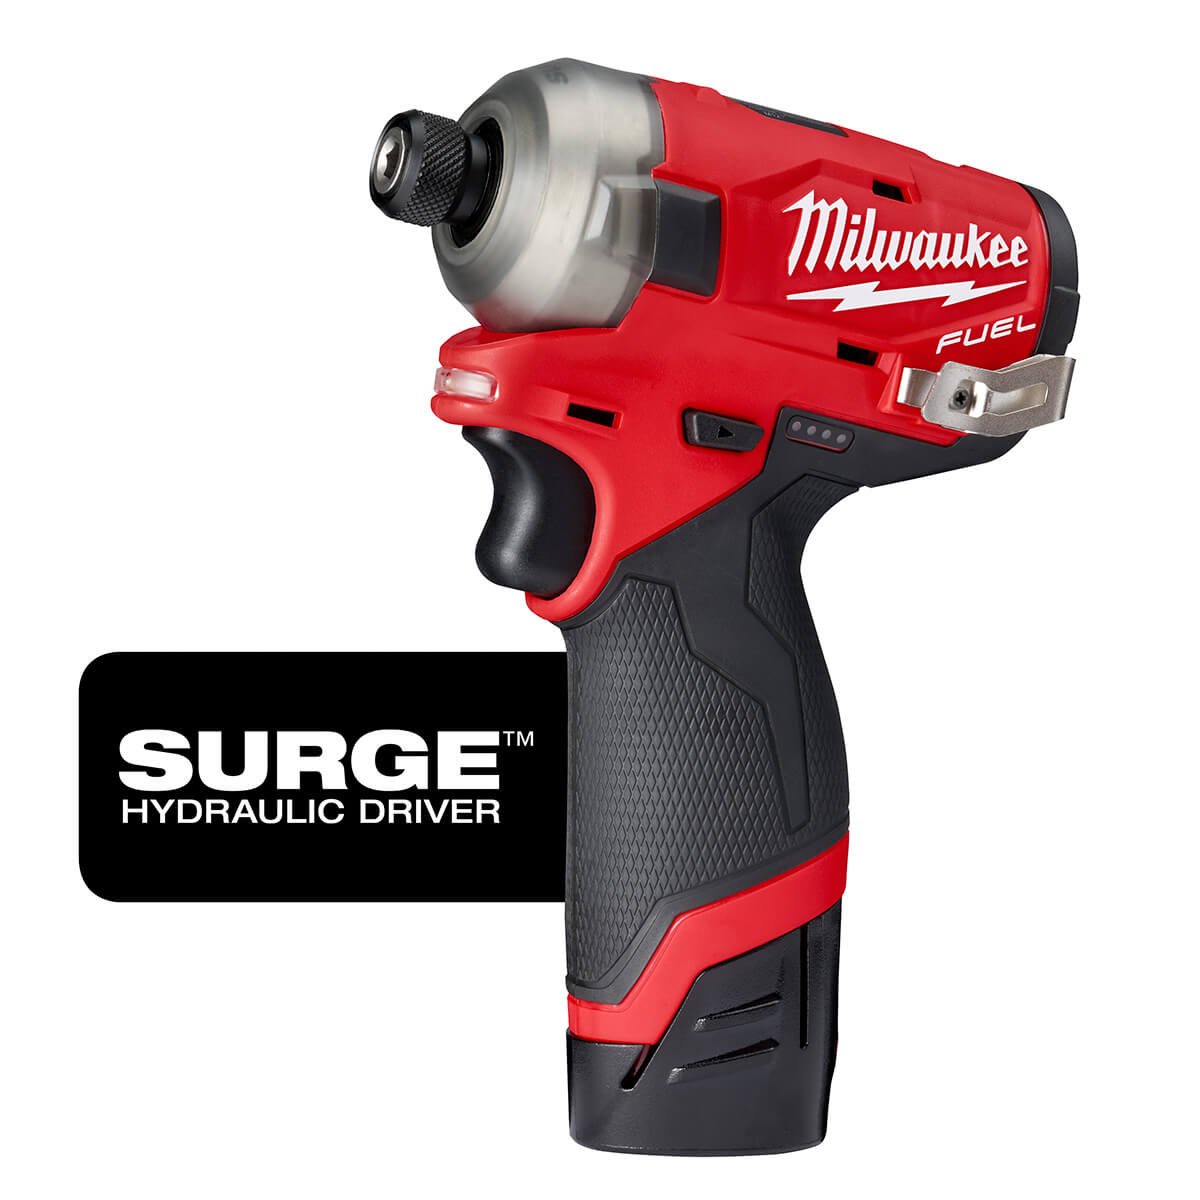 Milwaukee 2551-22 - M12 FUEL™ SURGE™ 1/4" Hex Hydraulic Driver 2 Battery Kit